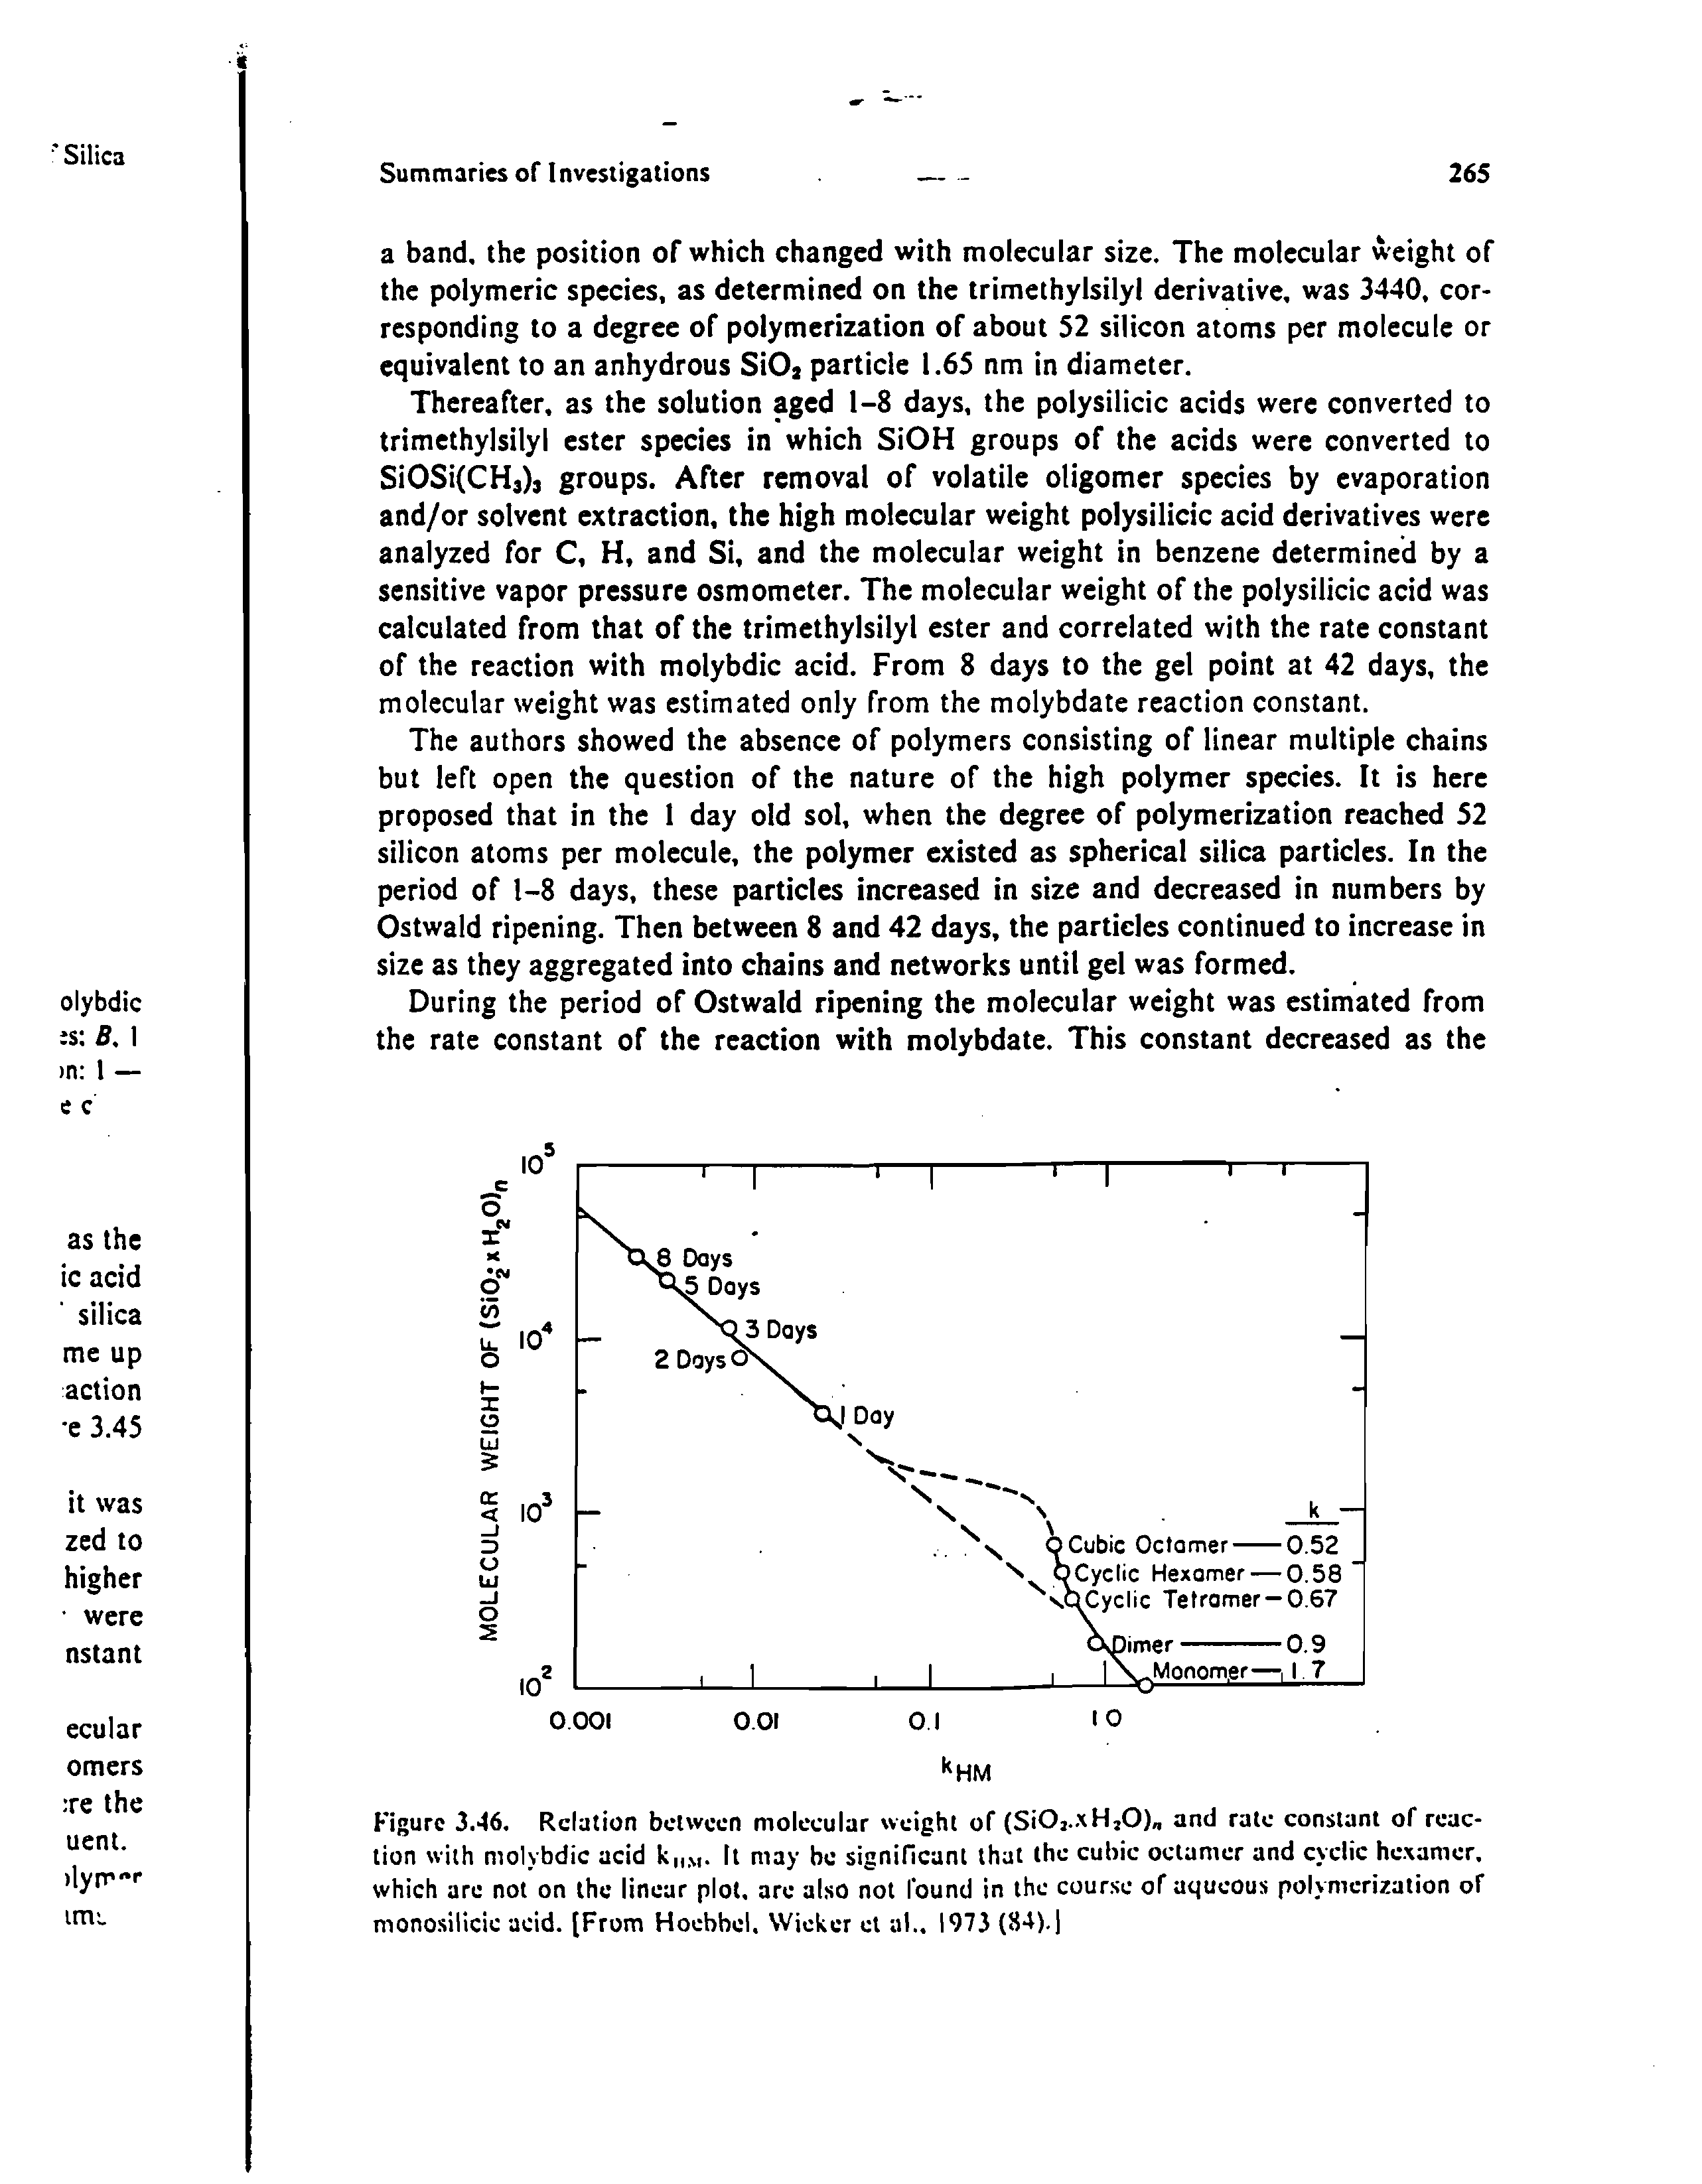 Figure 3.46. Relation between molecular weight of (SiOj..xHjO) and rate constant of reaction with molybdic acid k ., . It may be significant that the cubic octamer and cyclic hcxamcr. which are not on the linear plot, are also not found in the course of aqueous polymerization of monosilicic acid. [From Hoebhel. Wicker et al.. 1973 (84)-l...